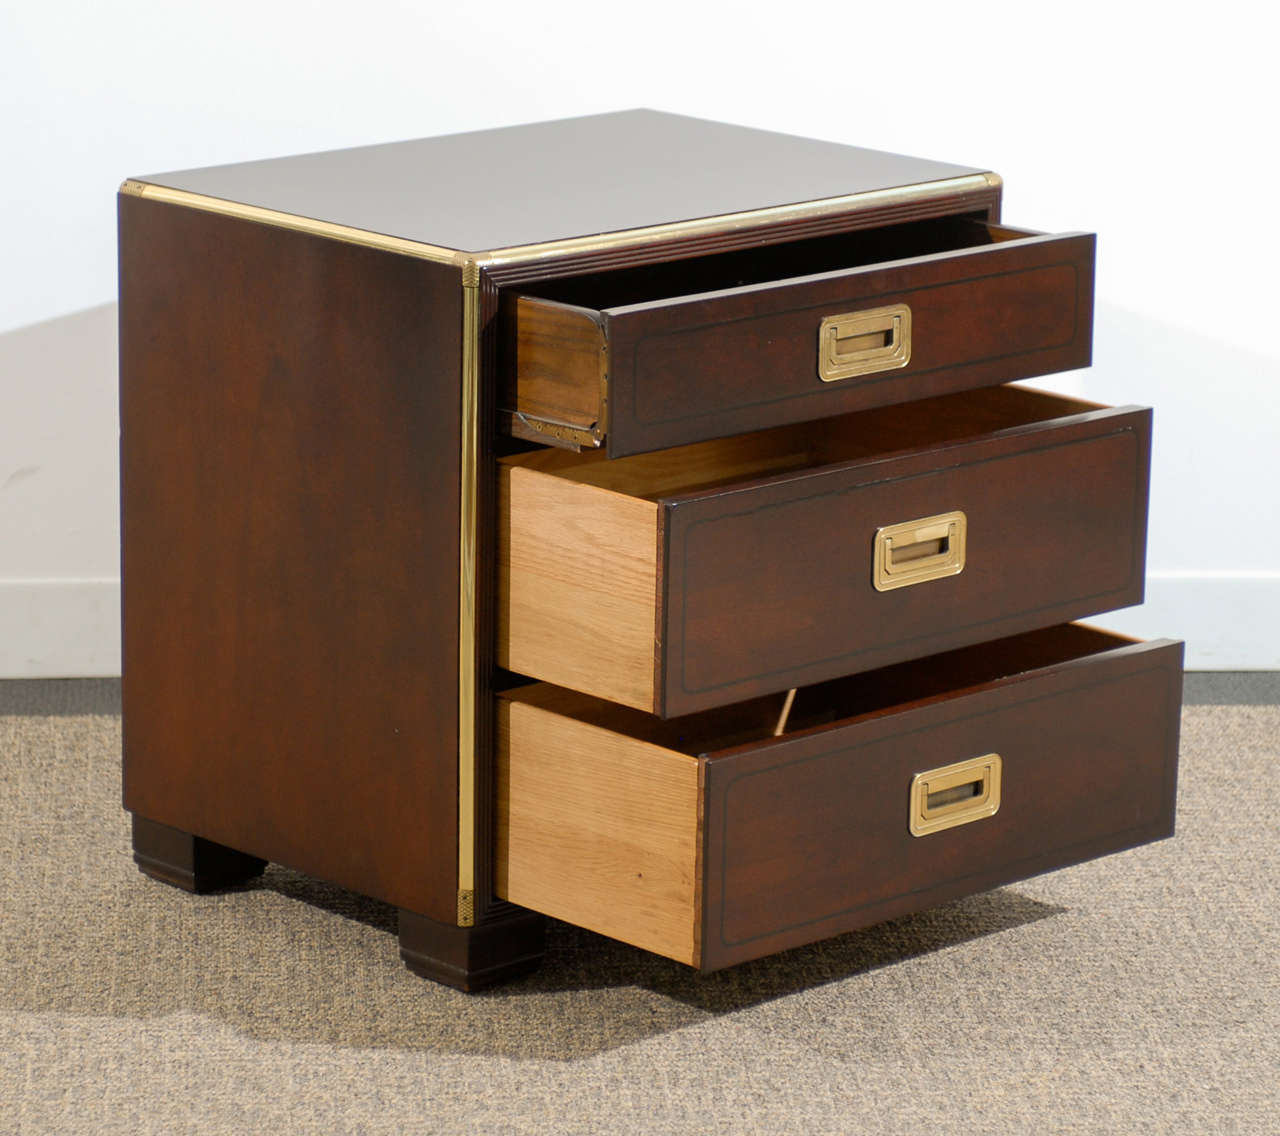 American Pair of Baker Campaign Chests in Espresso Lacquer